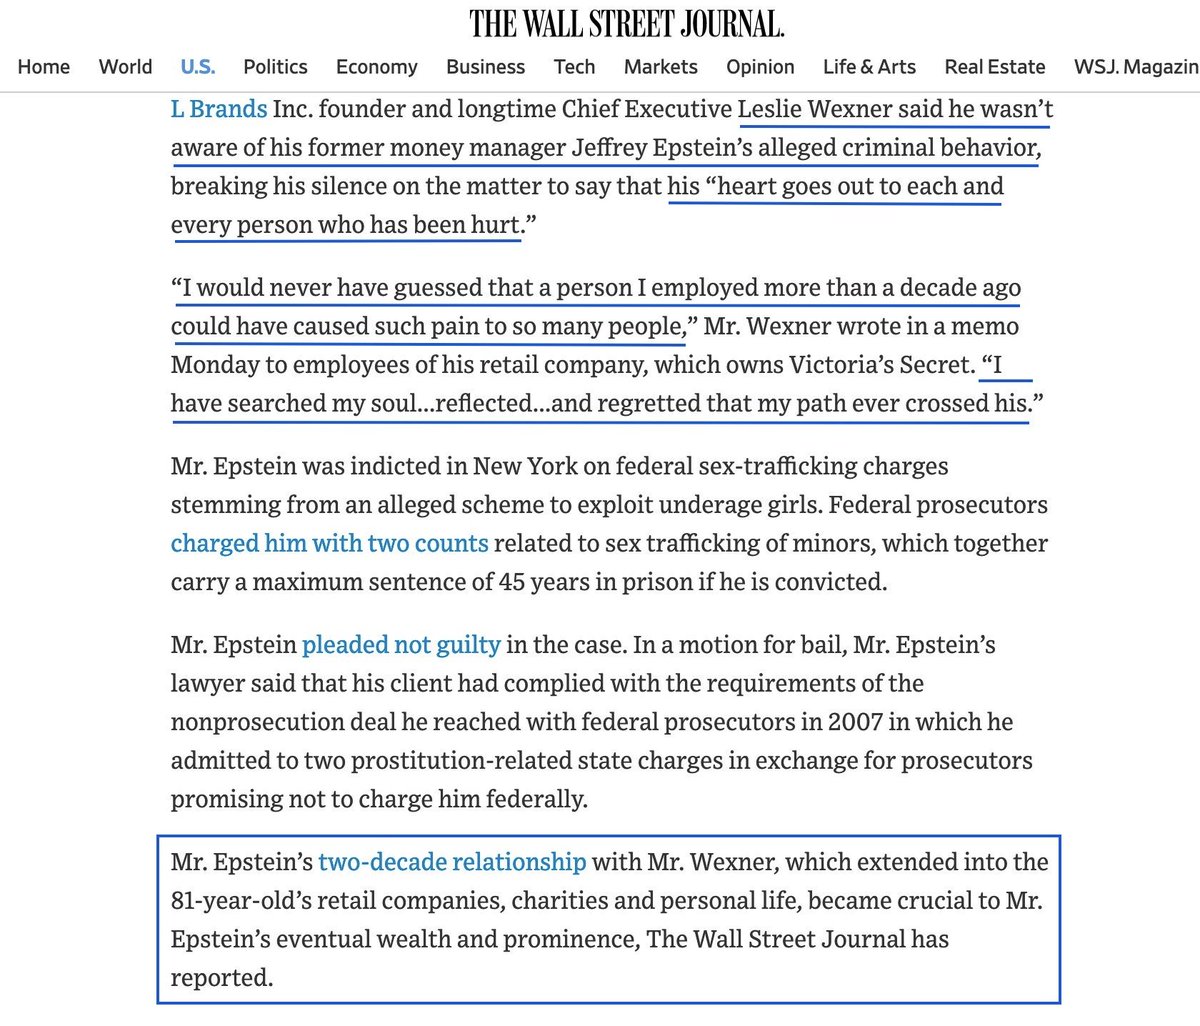 ExcusesWSJ7-15-19Leslie Wexnerwasn't aware ofmoney manager,Jeffrey Epstein's,criminal behavior."Would never have guesseda person I employedmore than a decade agoTry 80s Les. Not a decade.Y can't WSJ remember their own reporting.They met in the 80s per WSJ!